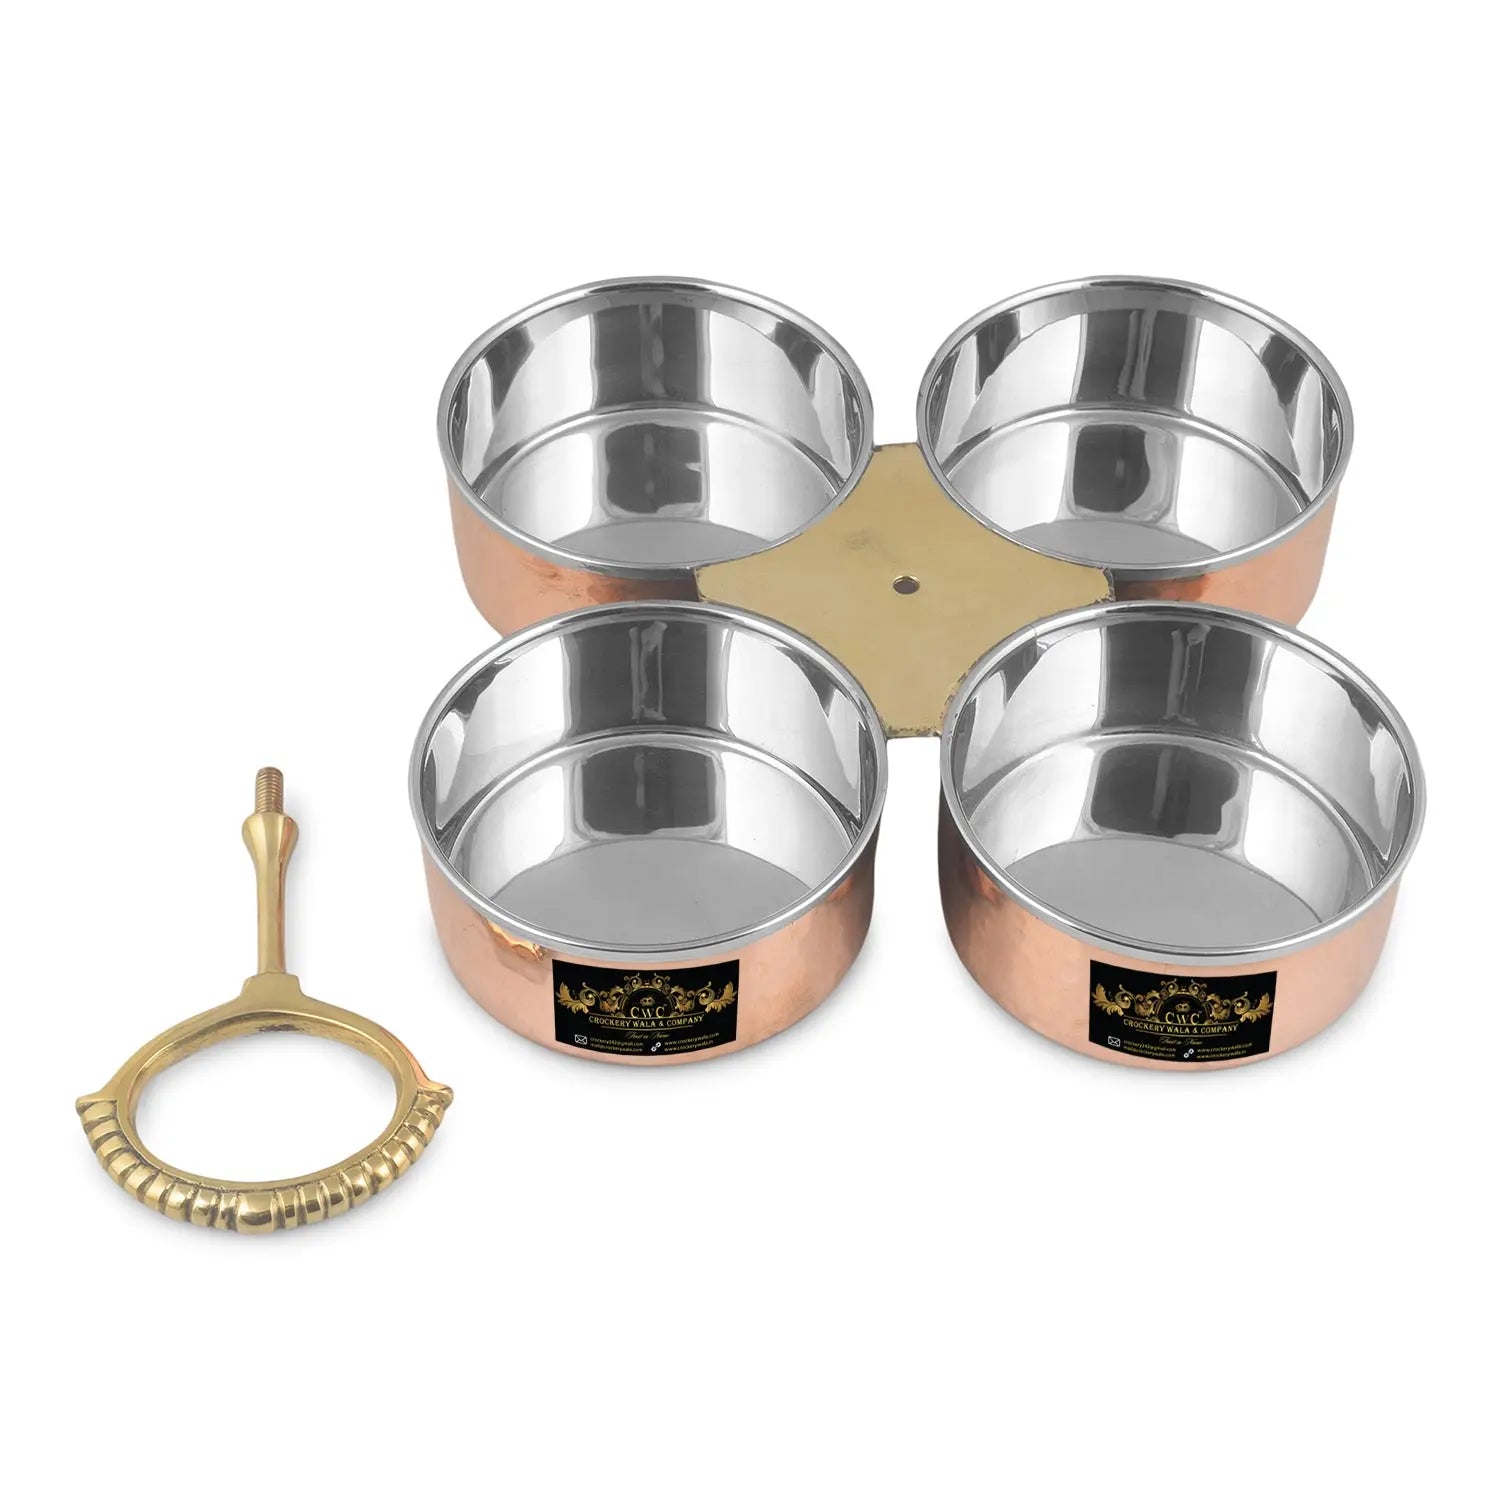 Copper Food Server Dish With Partition - CROCKERY WALA AND COMPANY 